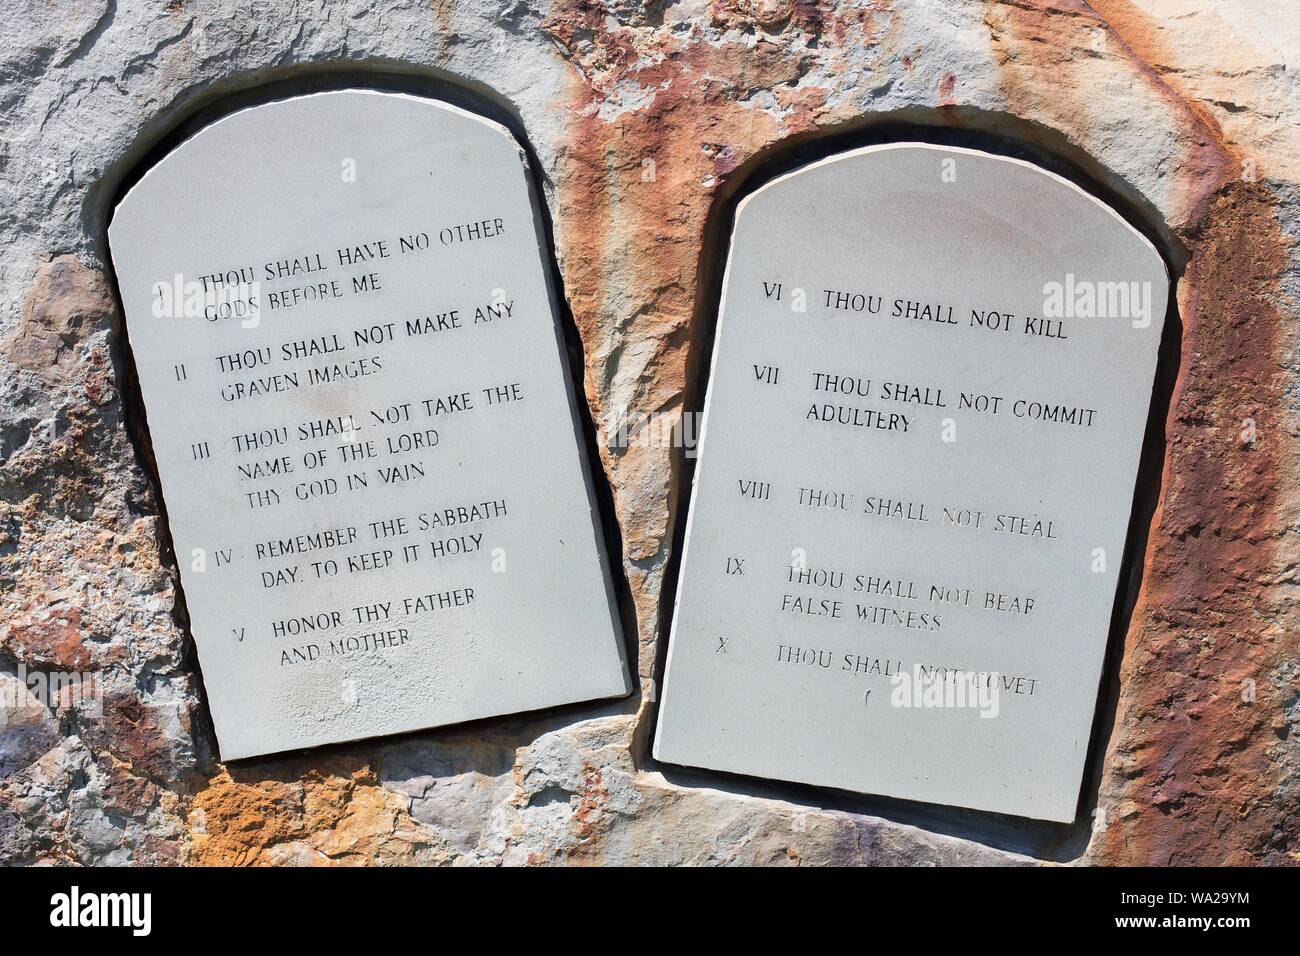 The ten commandments carved in stone tablets outside the Shrine of the Holy Spirit in Branson, Missouri, USA. Stock Photo